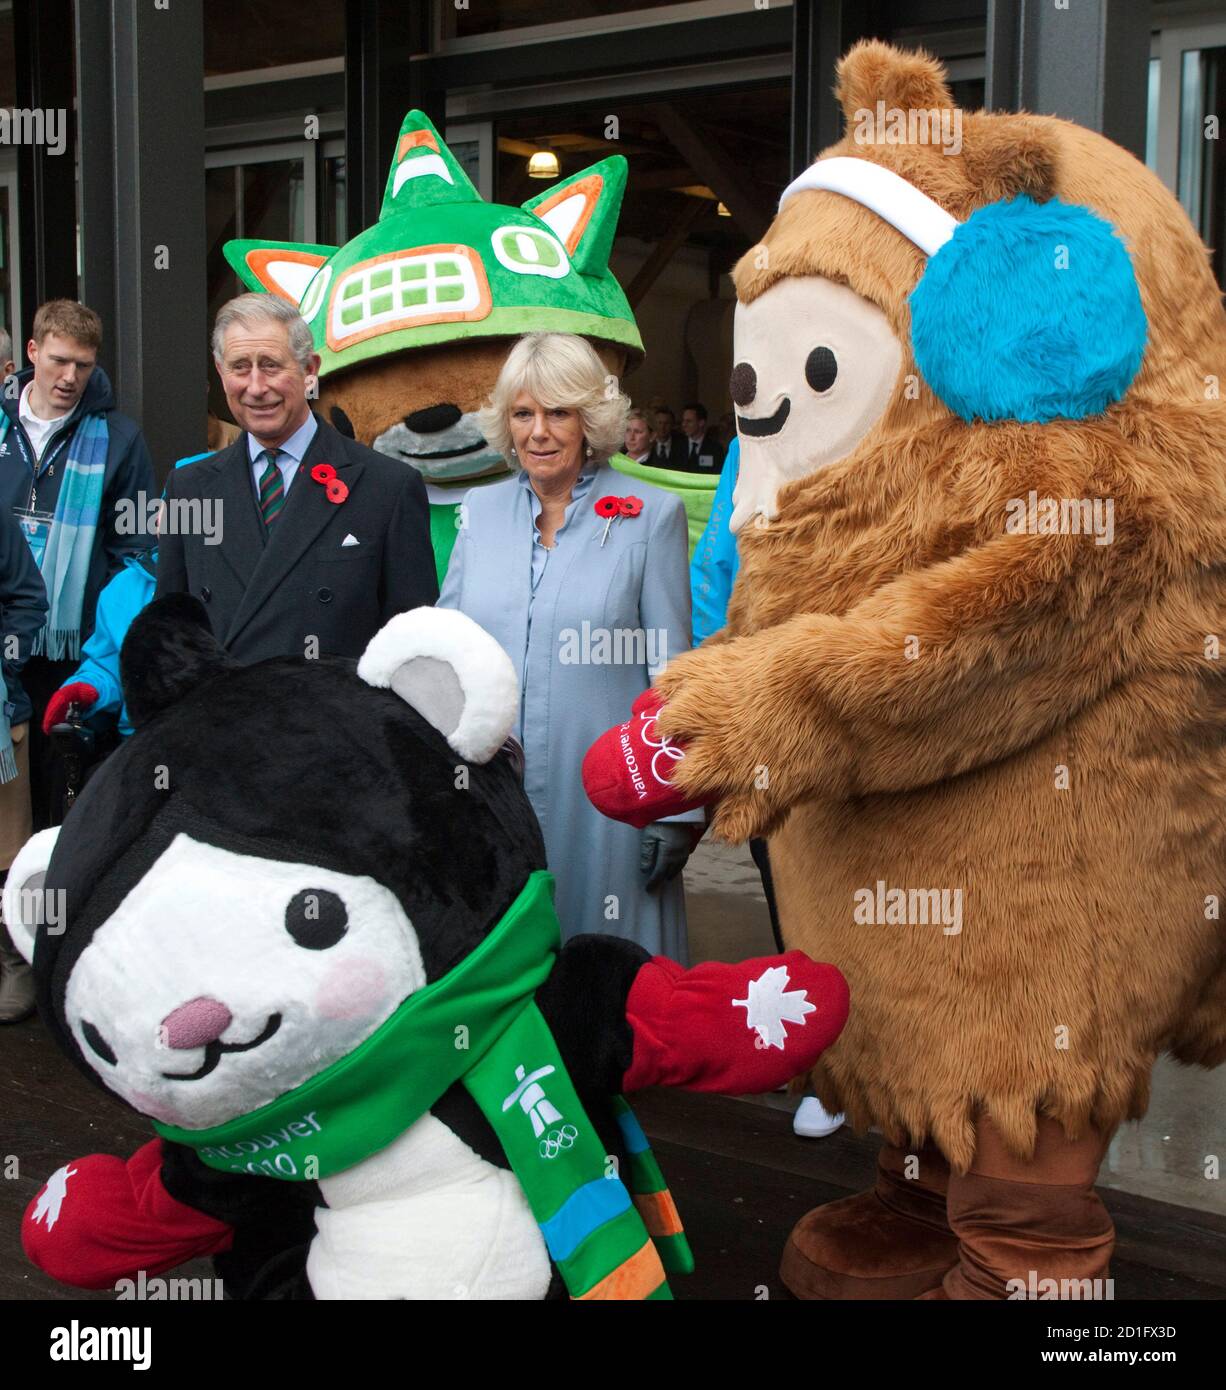 prince-charles-and-his-wife-camilla-duchess-of-cornwall-pose-with-the-mascots-for-the-2010-olympic-winter-games-quatchi-r-miga-c-and-sumi-during-a-visit-to-the-athletes-village-in-vancouver-british-columbia-november-7-2009-reutersandy-clark-canada-royals-politics-sport-olympics-2D1FX3D.jpg